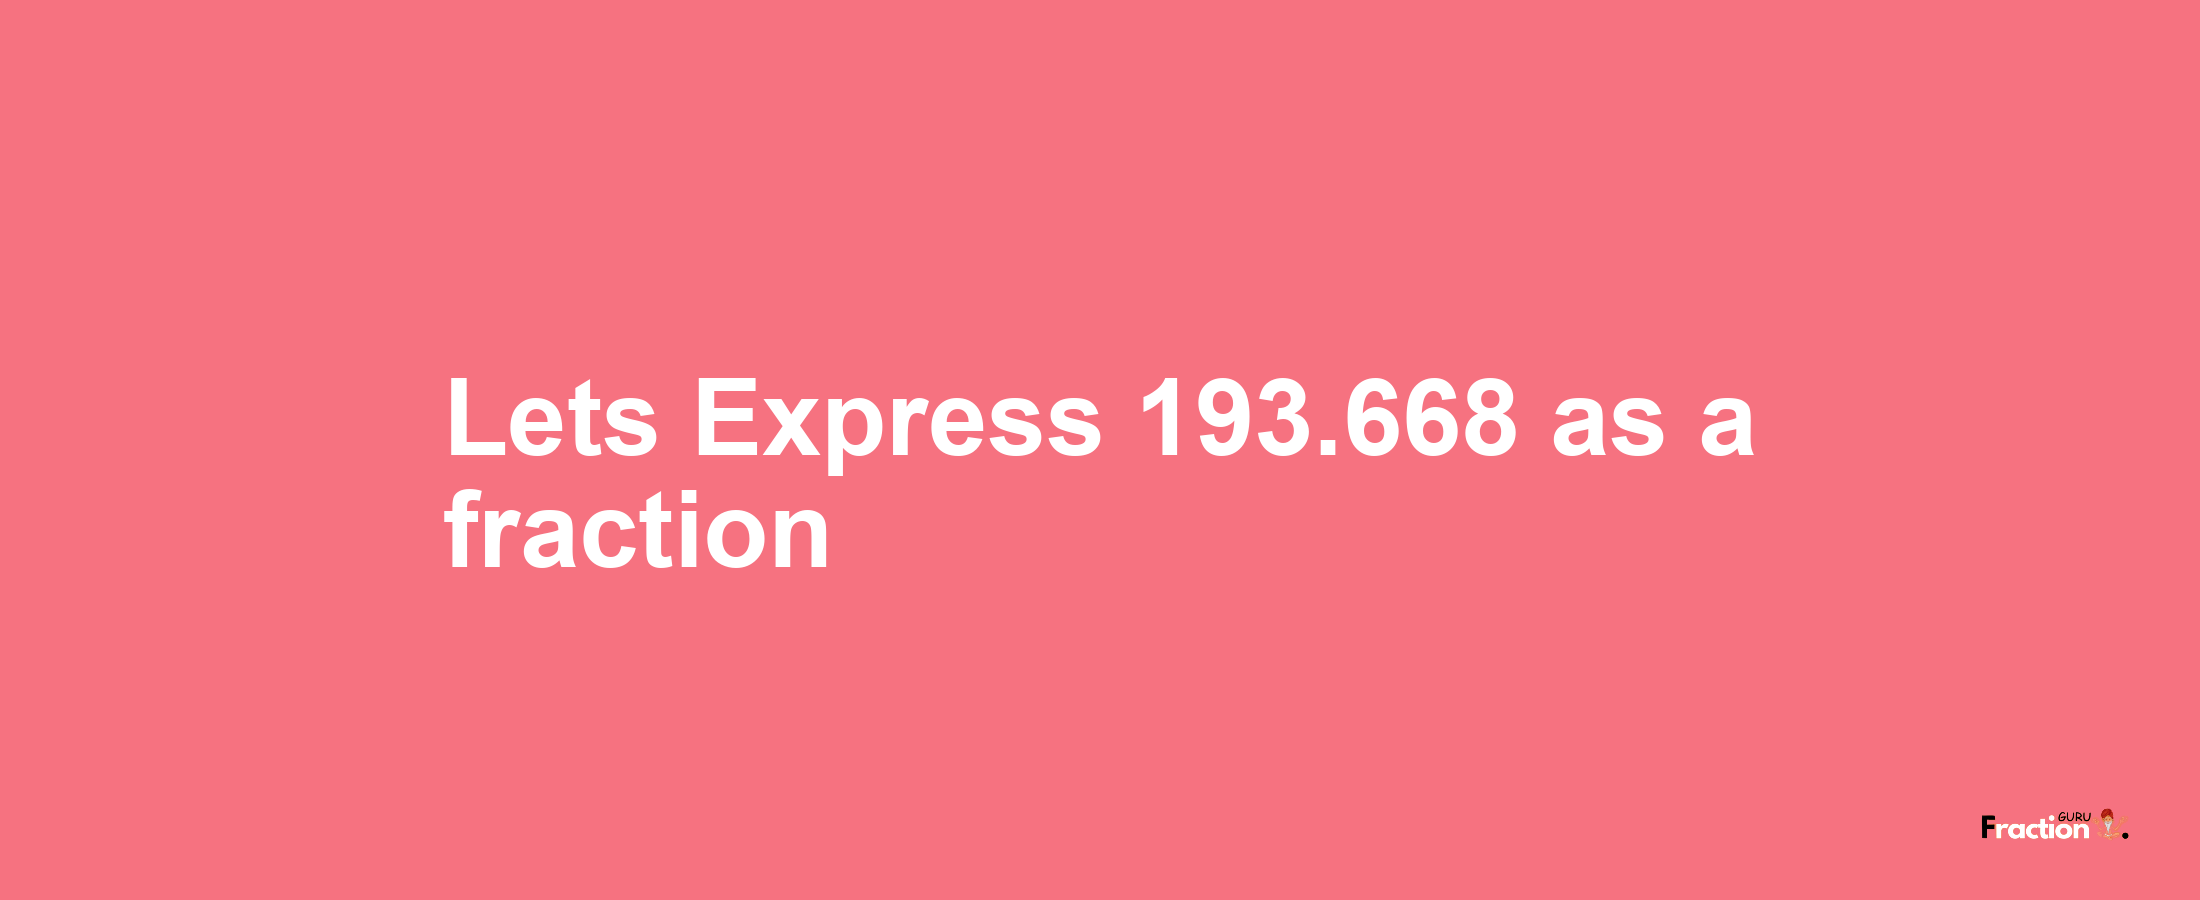 Lets Express 193.668 as afraction